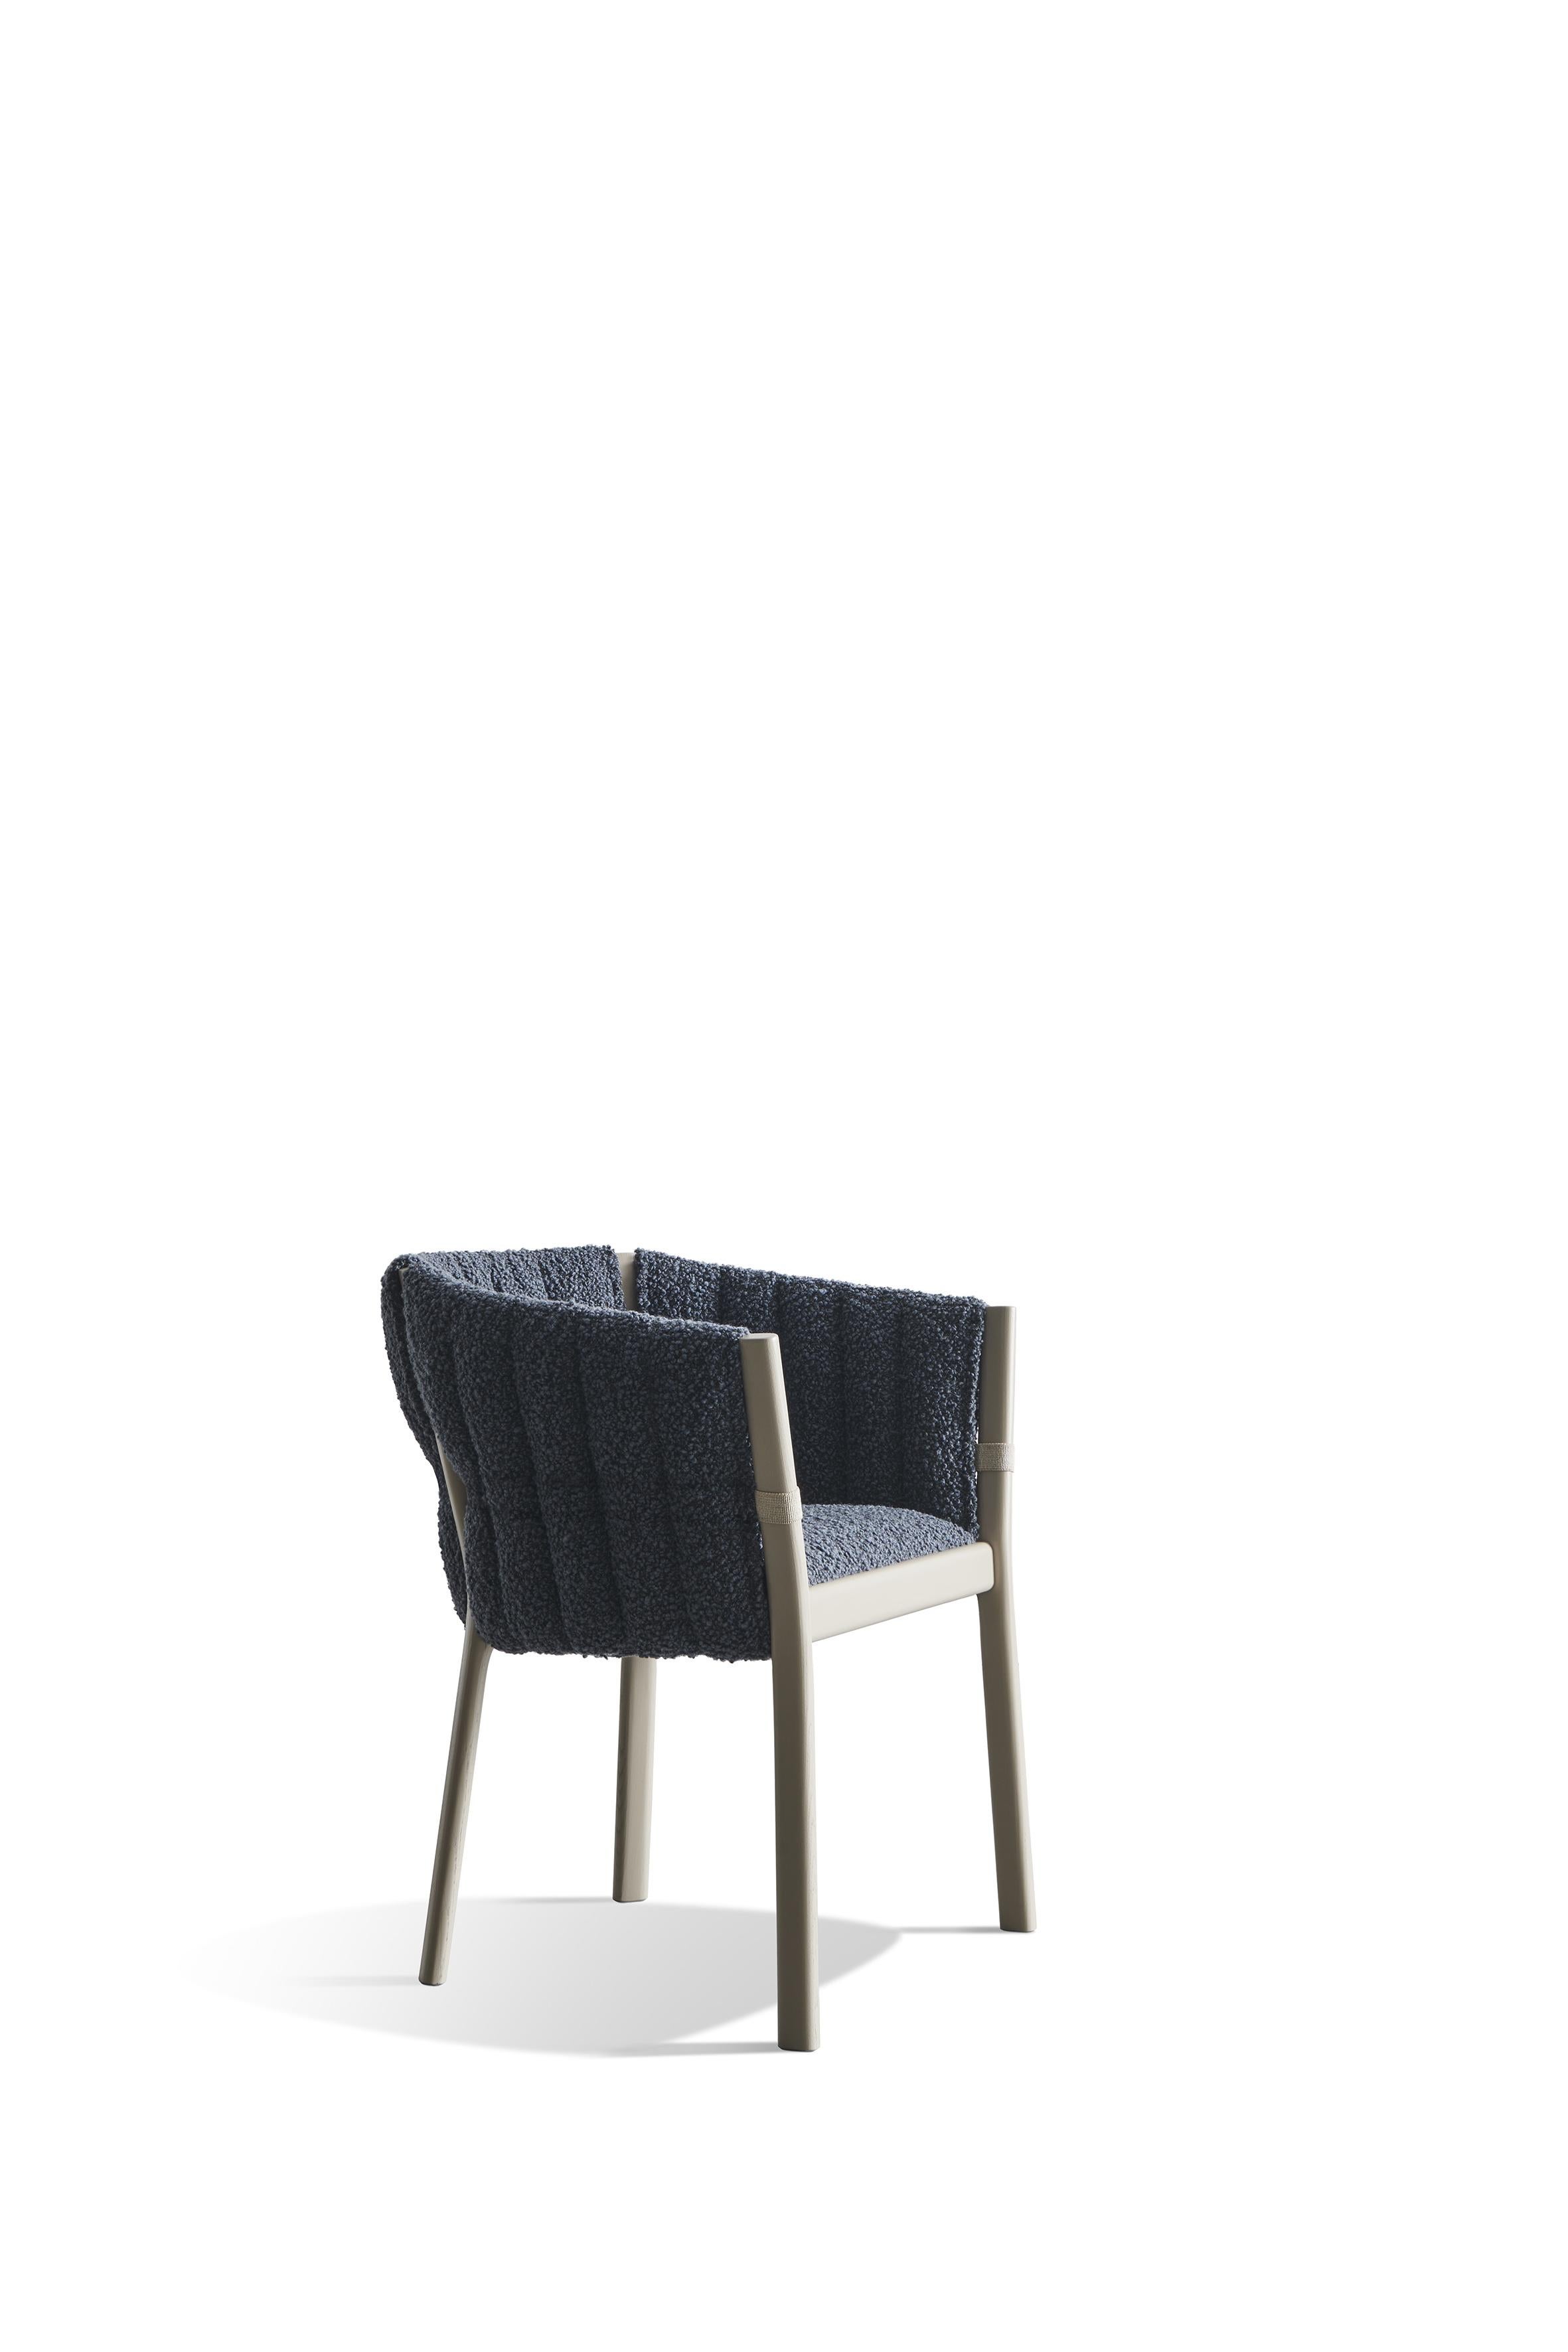 The collection of chairs Yelek, a Turkish term for Gilet, is inspired by a tailored jacket. With the same philosophy devoted to attention to detail as the world of haute couture, Yelek is defined by a coulisse integrated into the structure that